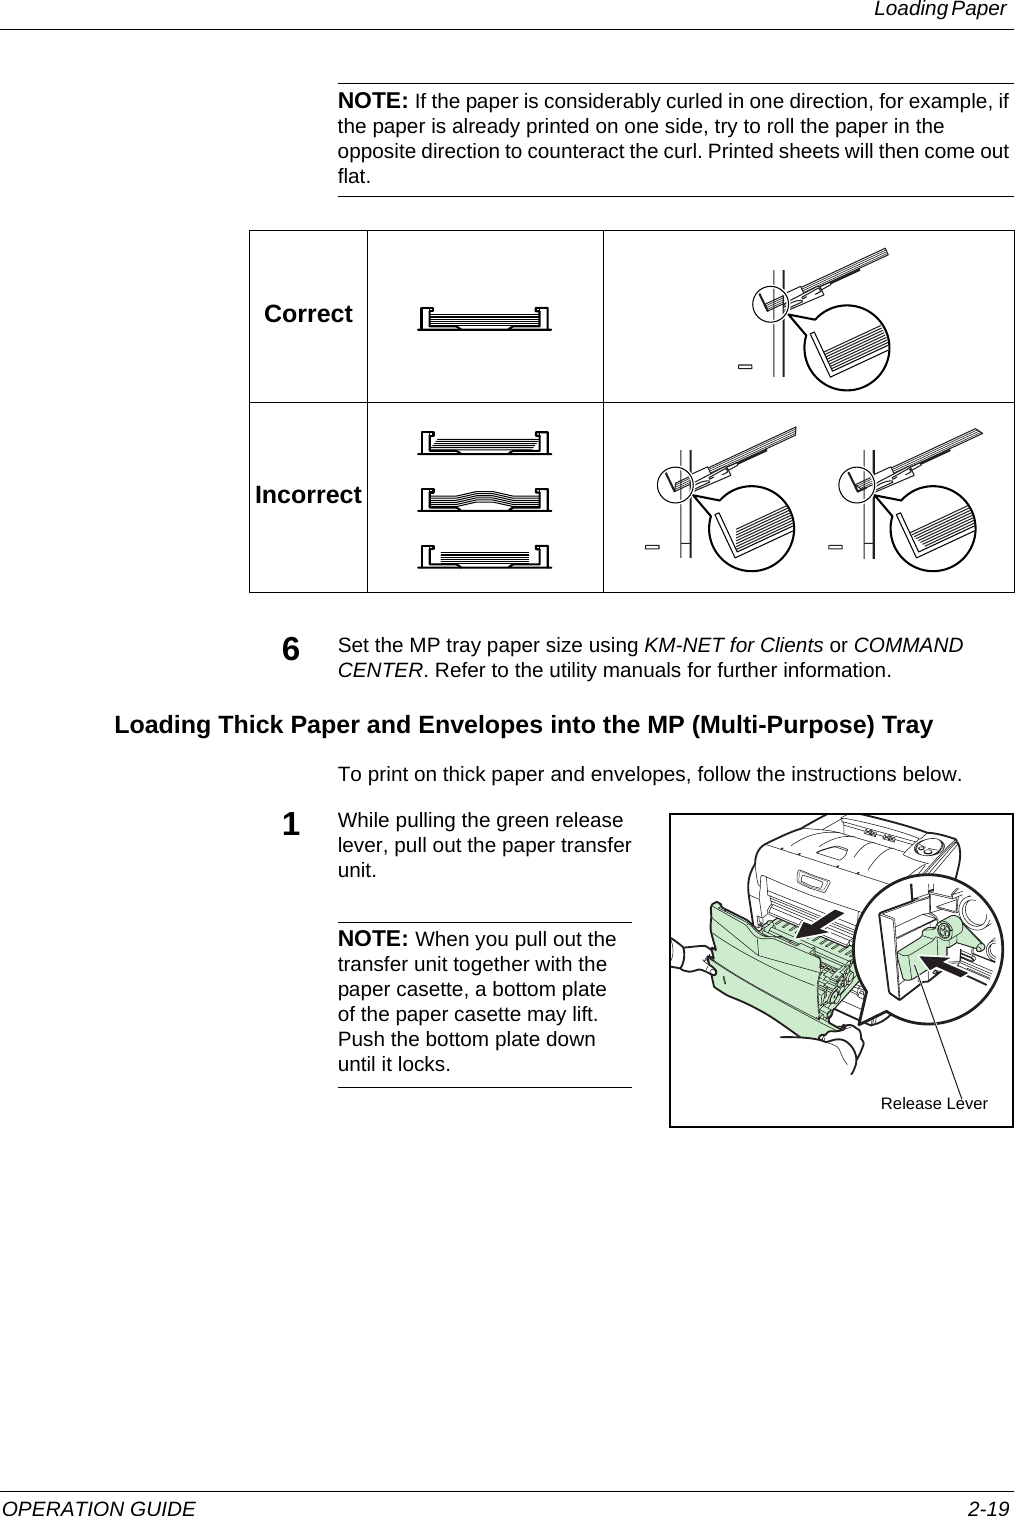 Loading Paper OPERATION GUIDE 2-19NOTE: If the paper is considerably curled in one direction, for example, if the paper is already printed on one side, try to roll the paper in the opposite direction to counteract the curl. Printed sheets will then come out flat.6Set the MP tray paper size using KM-NET for Clients or COMMAND CENTER. Refer to the utility manuals for further information.Loading Thick Paper and Envelopes into the MP (Multi-Purpose) TrayTo print on thick paper and envelopes, follow the instructions below.1While pulling the green release lever, pull out the paper transfer unit.NOTE: When you pull out the transfer unit together with the paper casette, a bottom plate of the paper casette may lift. Push the bottom plate down until it locks.CorrectIncorrectRelease Lever